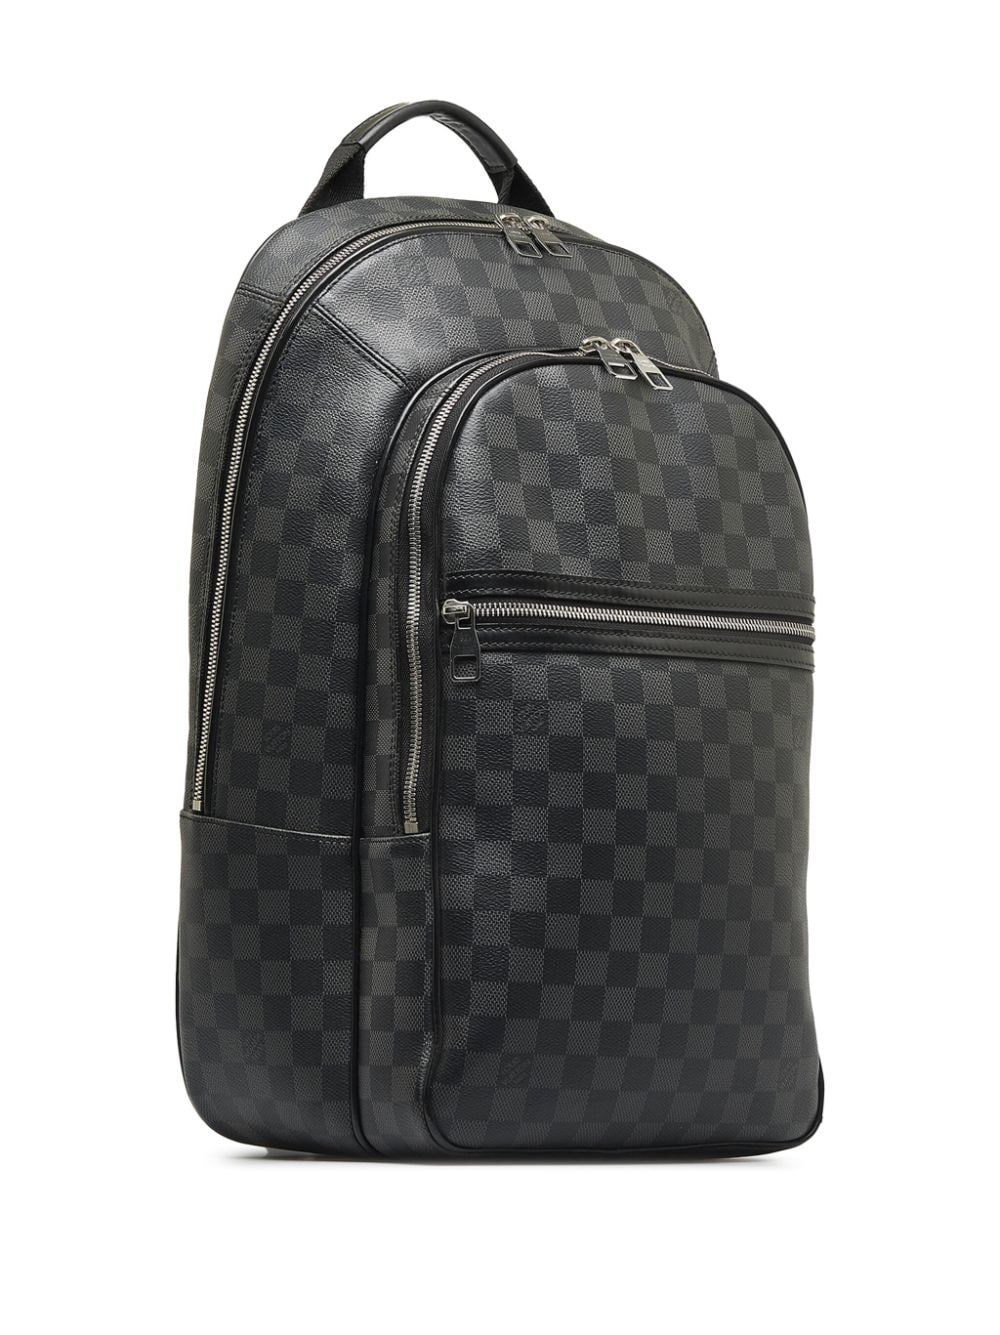 Louis Vuitton 2018 pre-owned Damier Graphite Zack Backpack - Farfetch